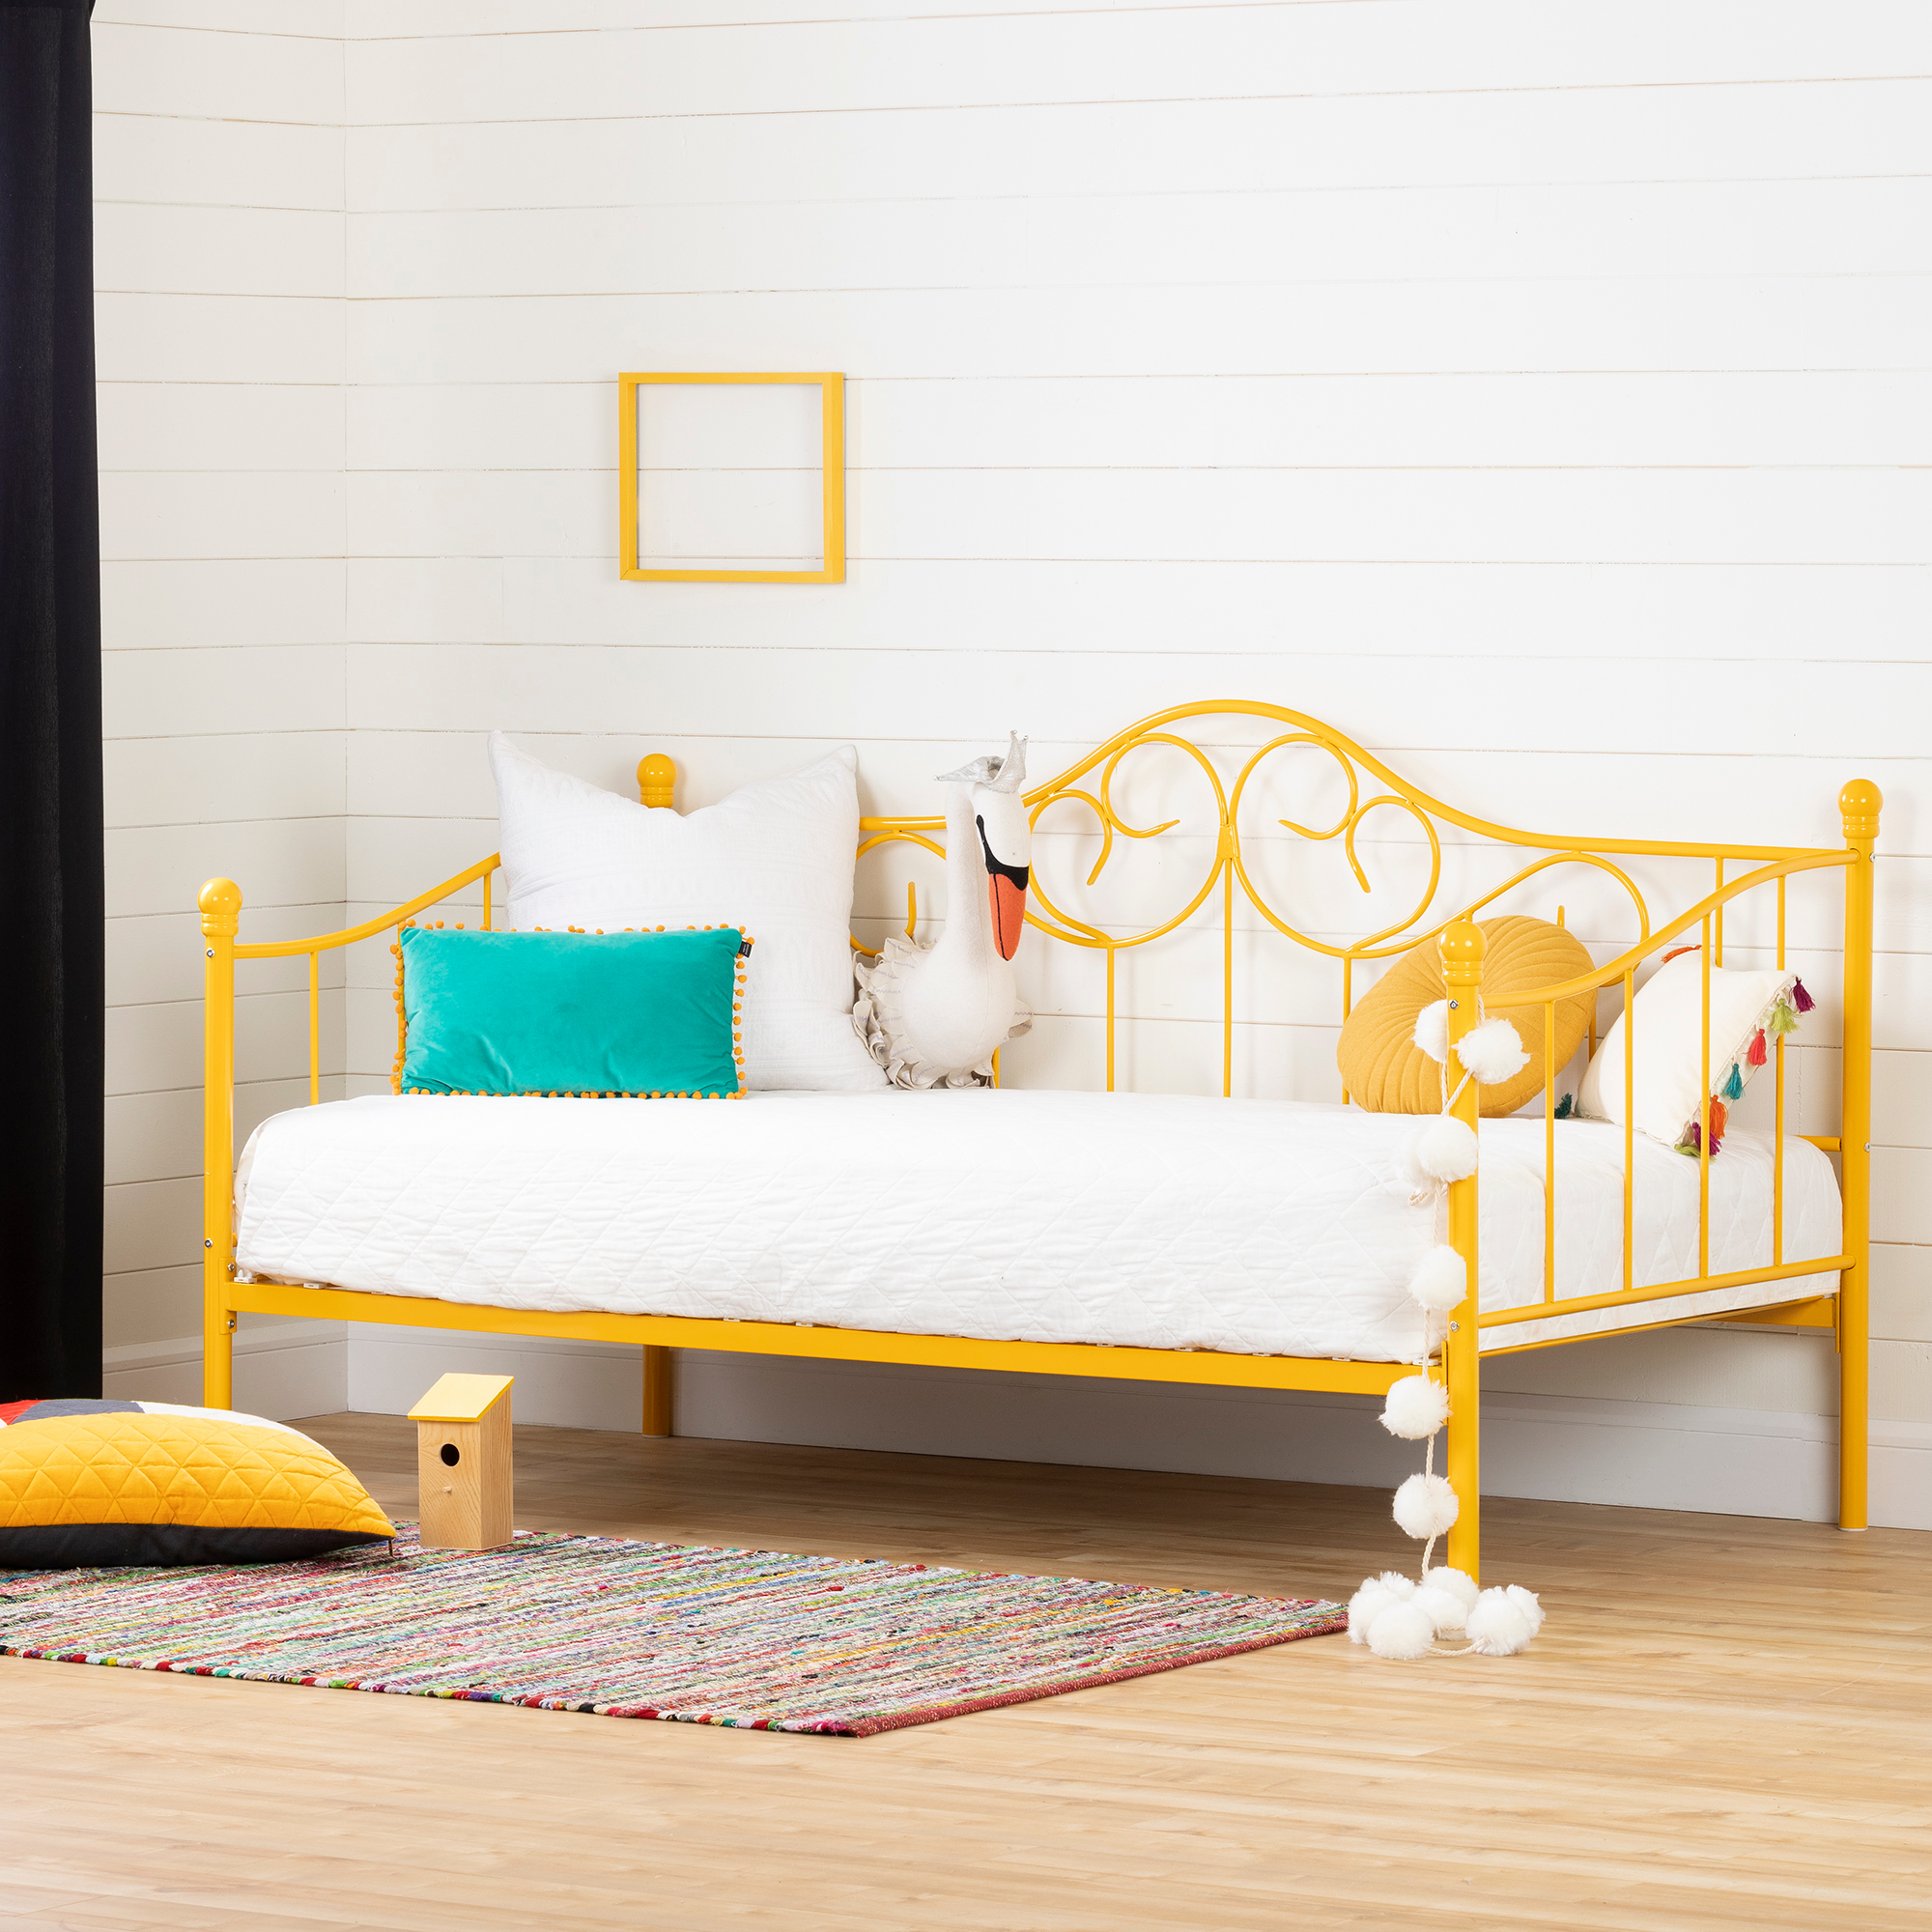 South Shore Balka Metal Twin Daybed with Metal Slats, Yellow - image 1 of 11